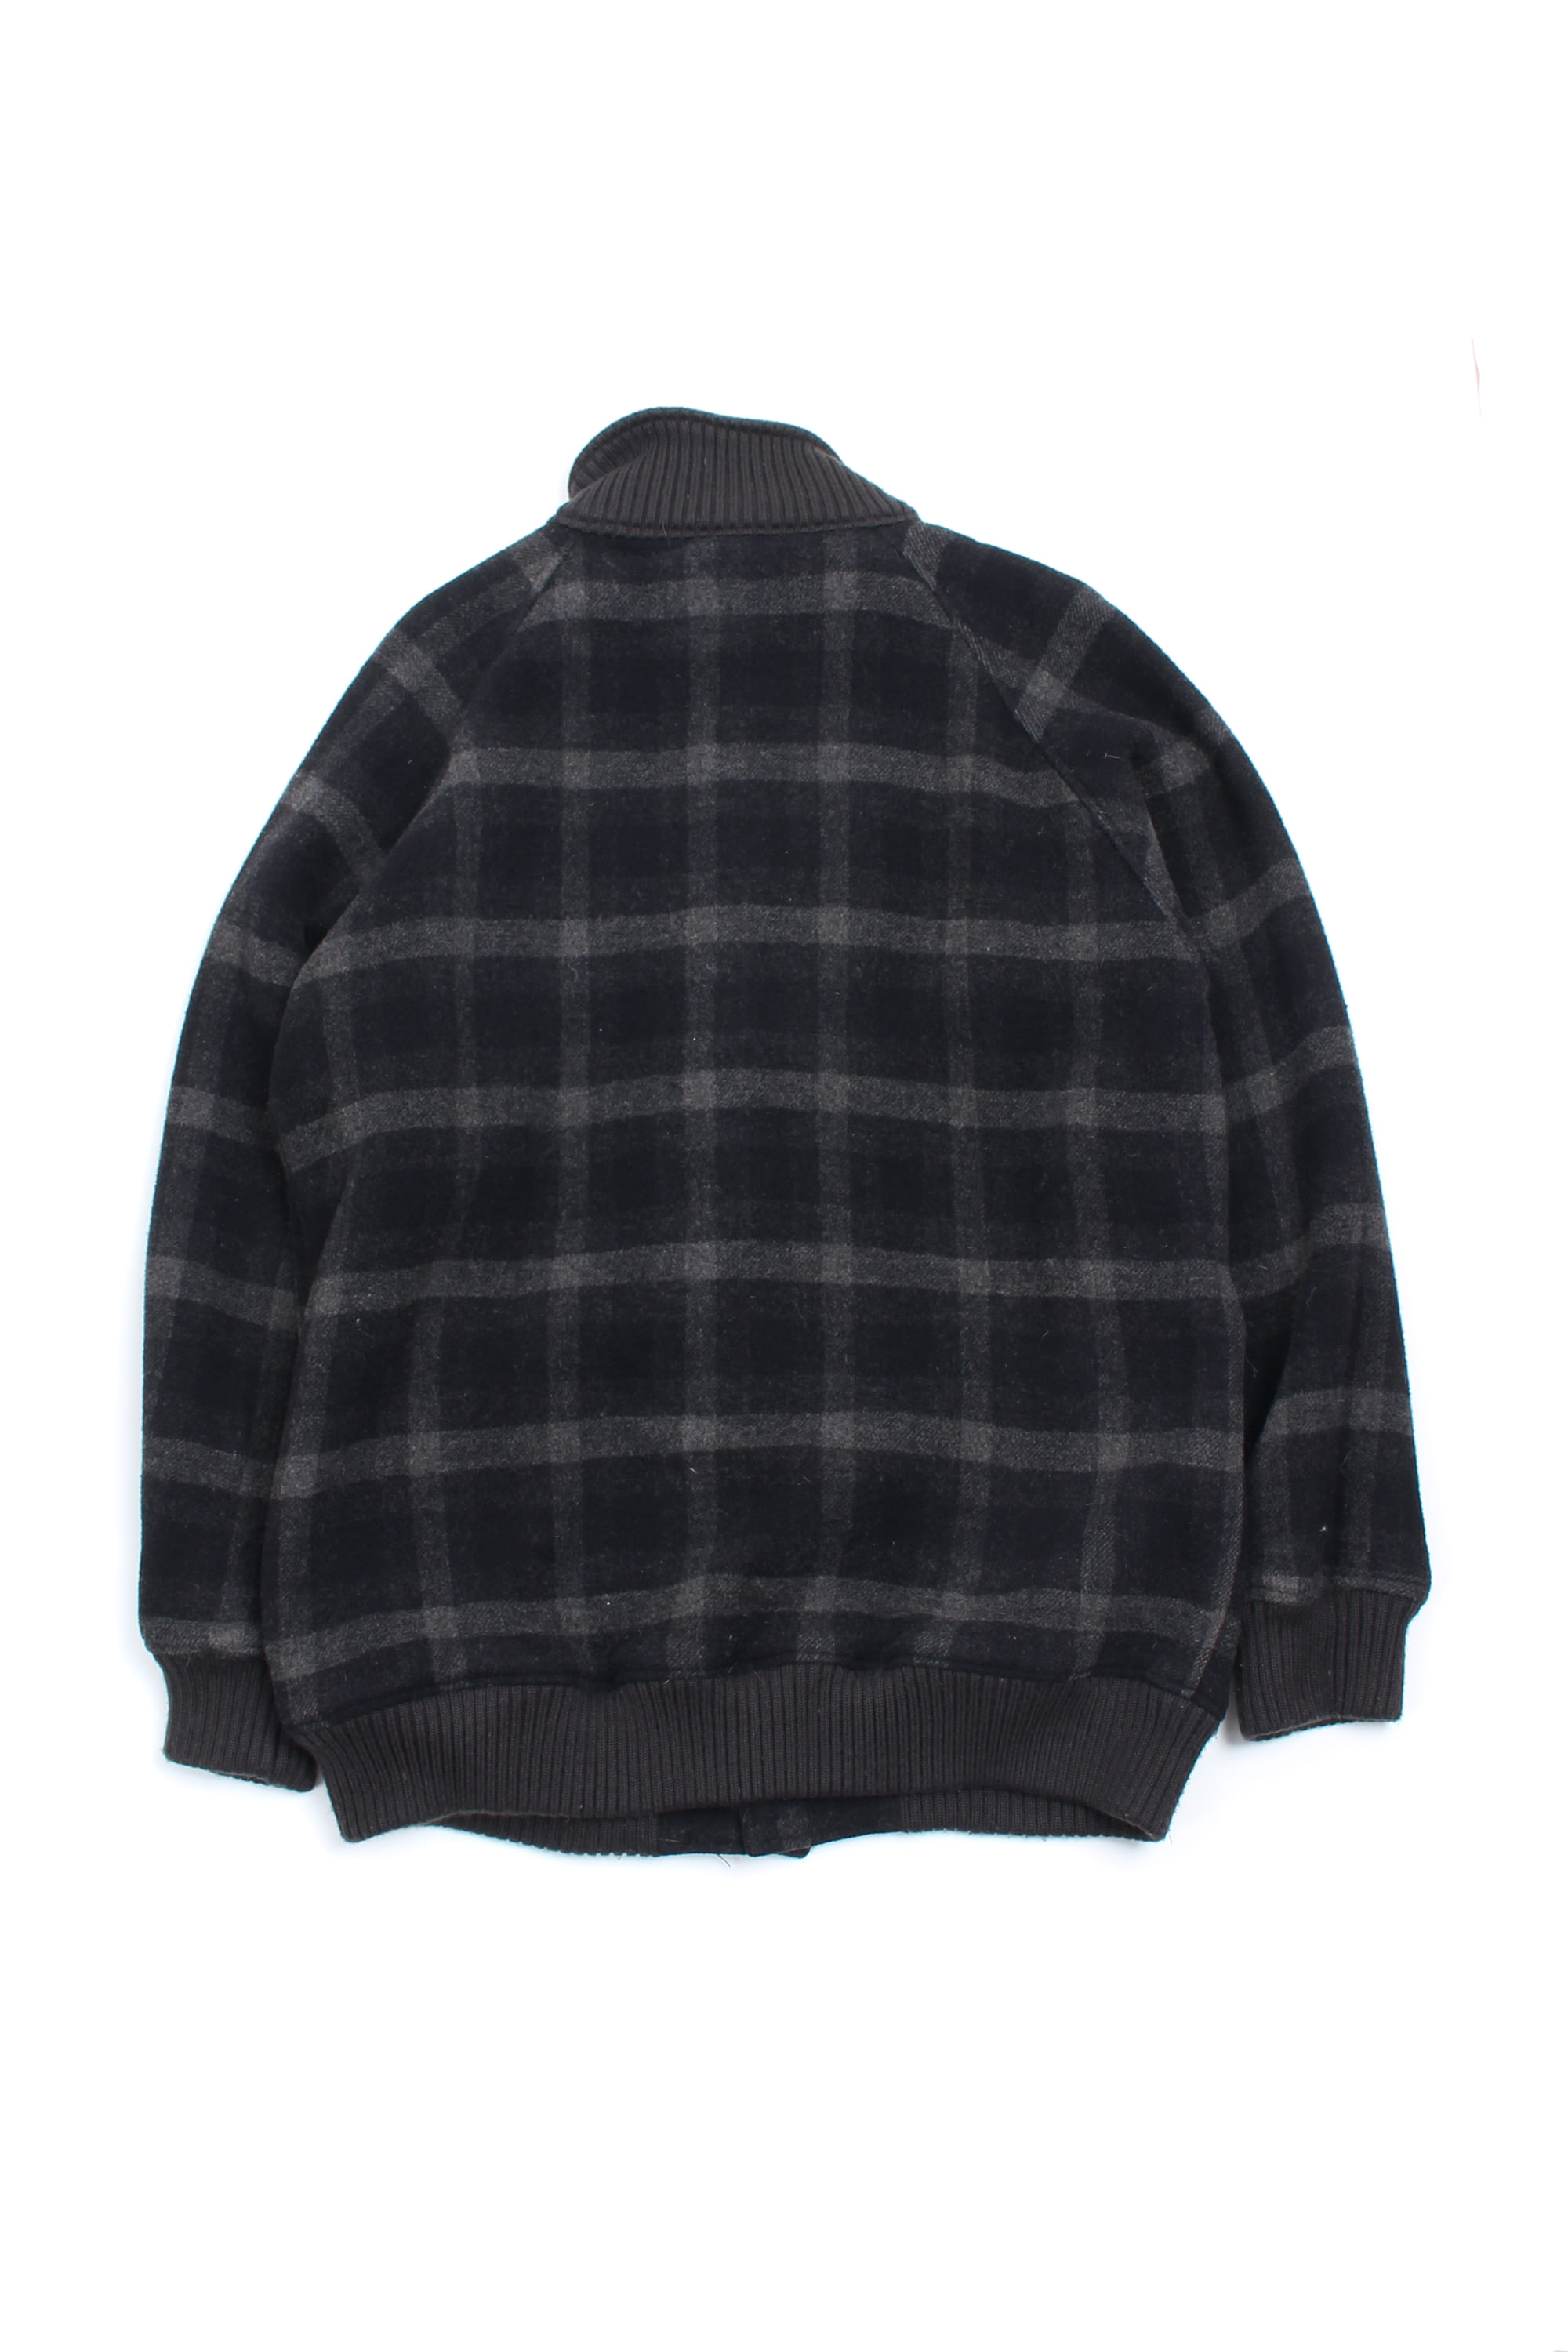 WOOLRICH Check Jacket